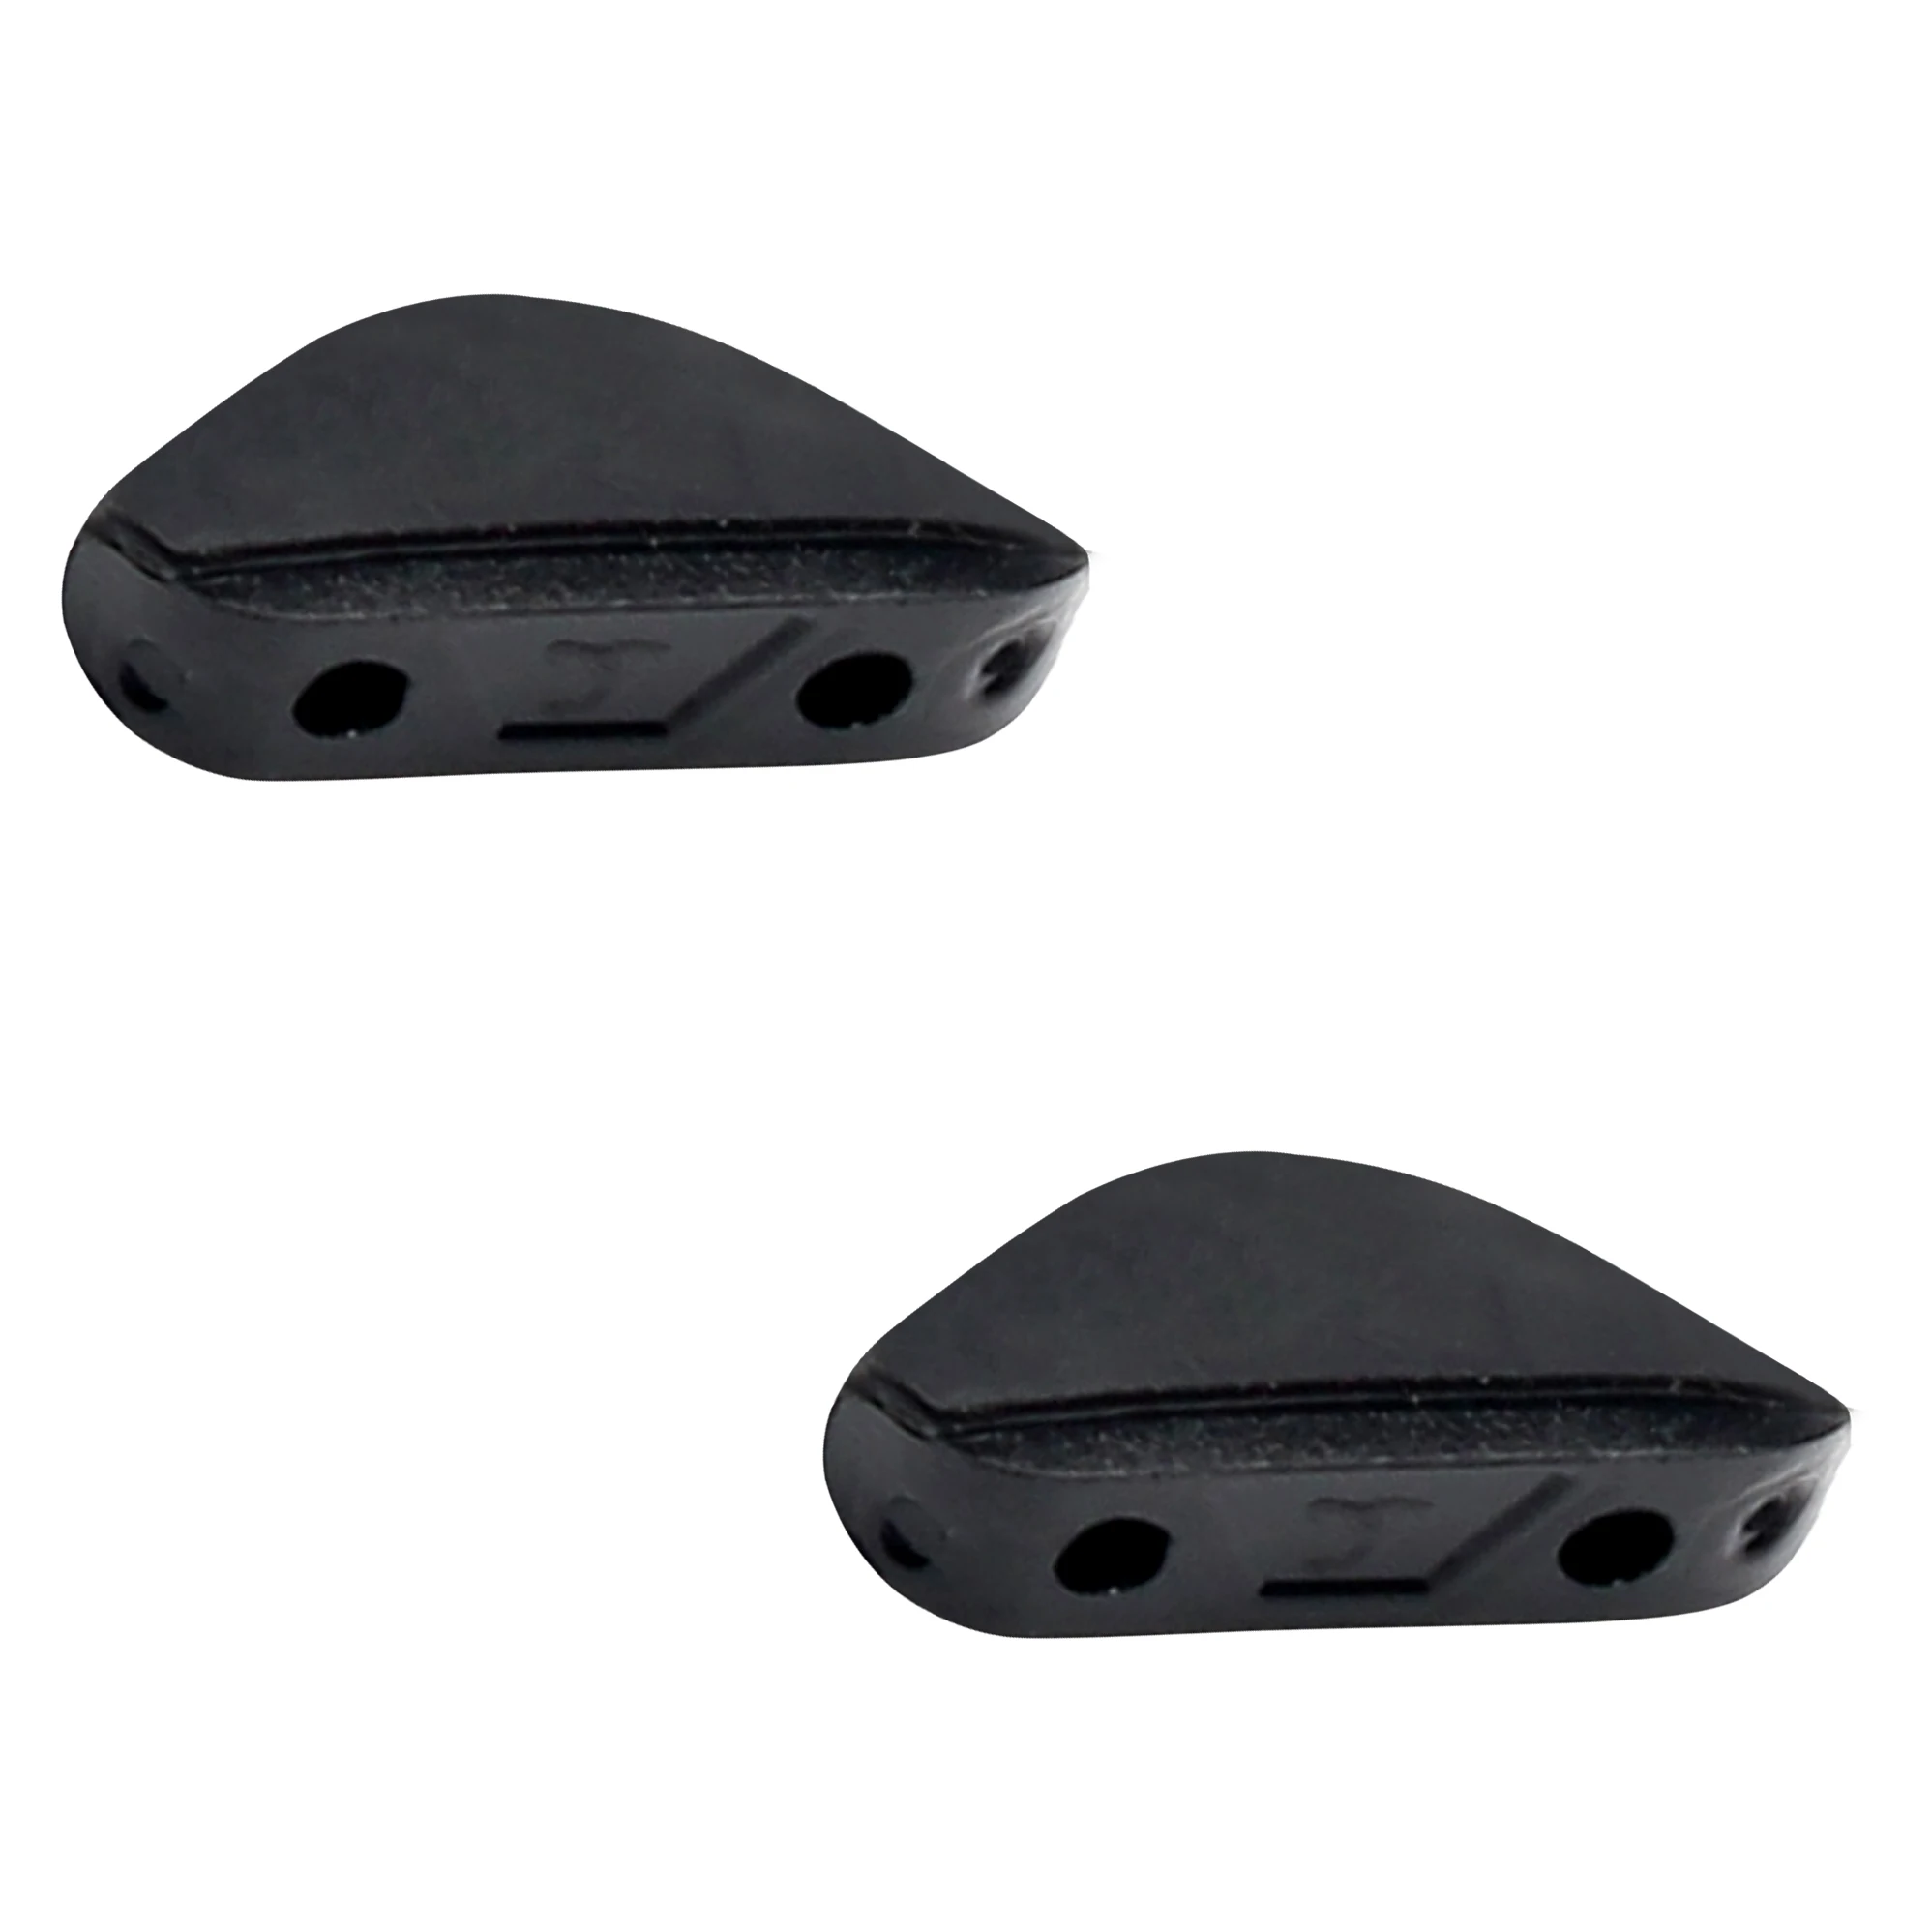 

Bwake Replacement Rubber Hard Base Nose Pads for-Oakley Fives Squared Sunglasses Frame - Multiple Options